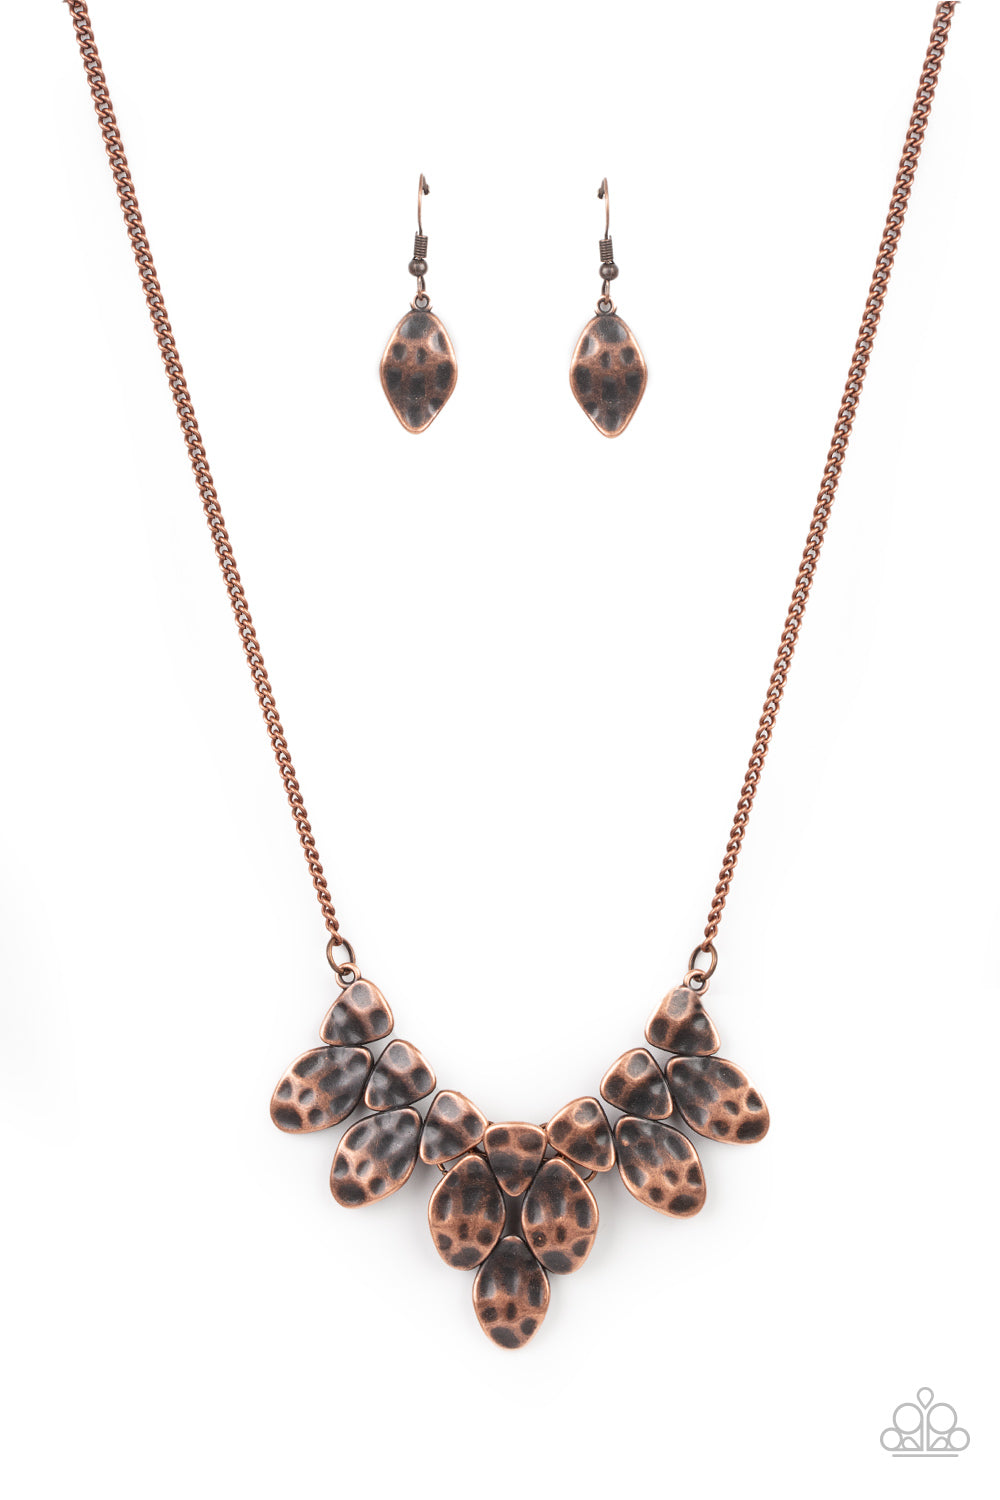 Paparazzi Rustic Smolder - Copper Necklace - A Finishing Touch Jewelry